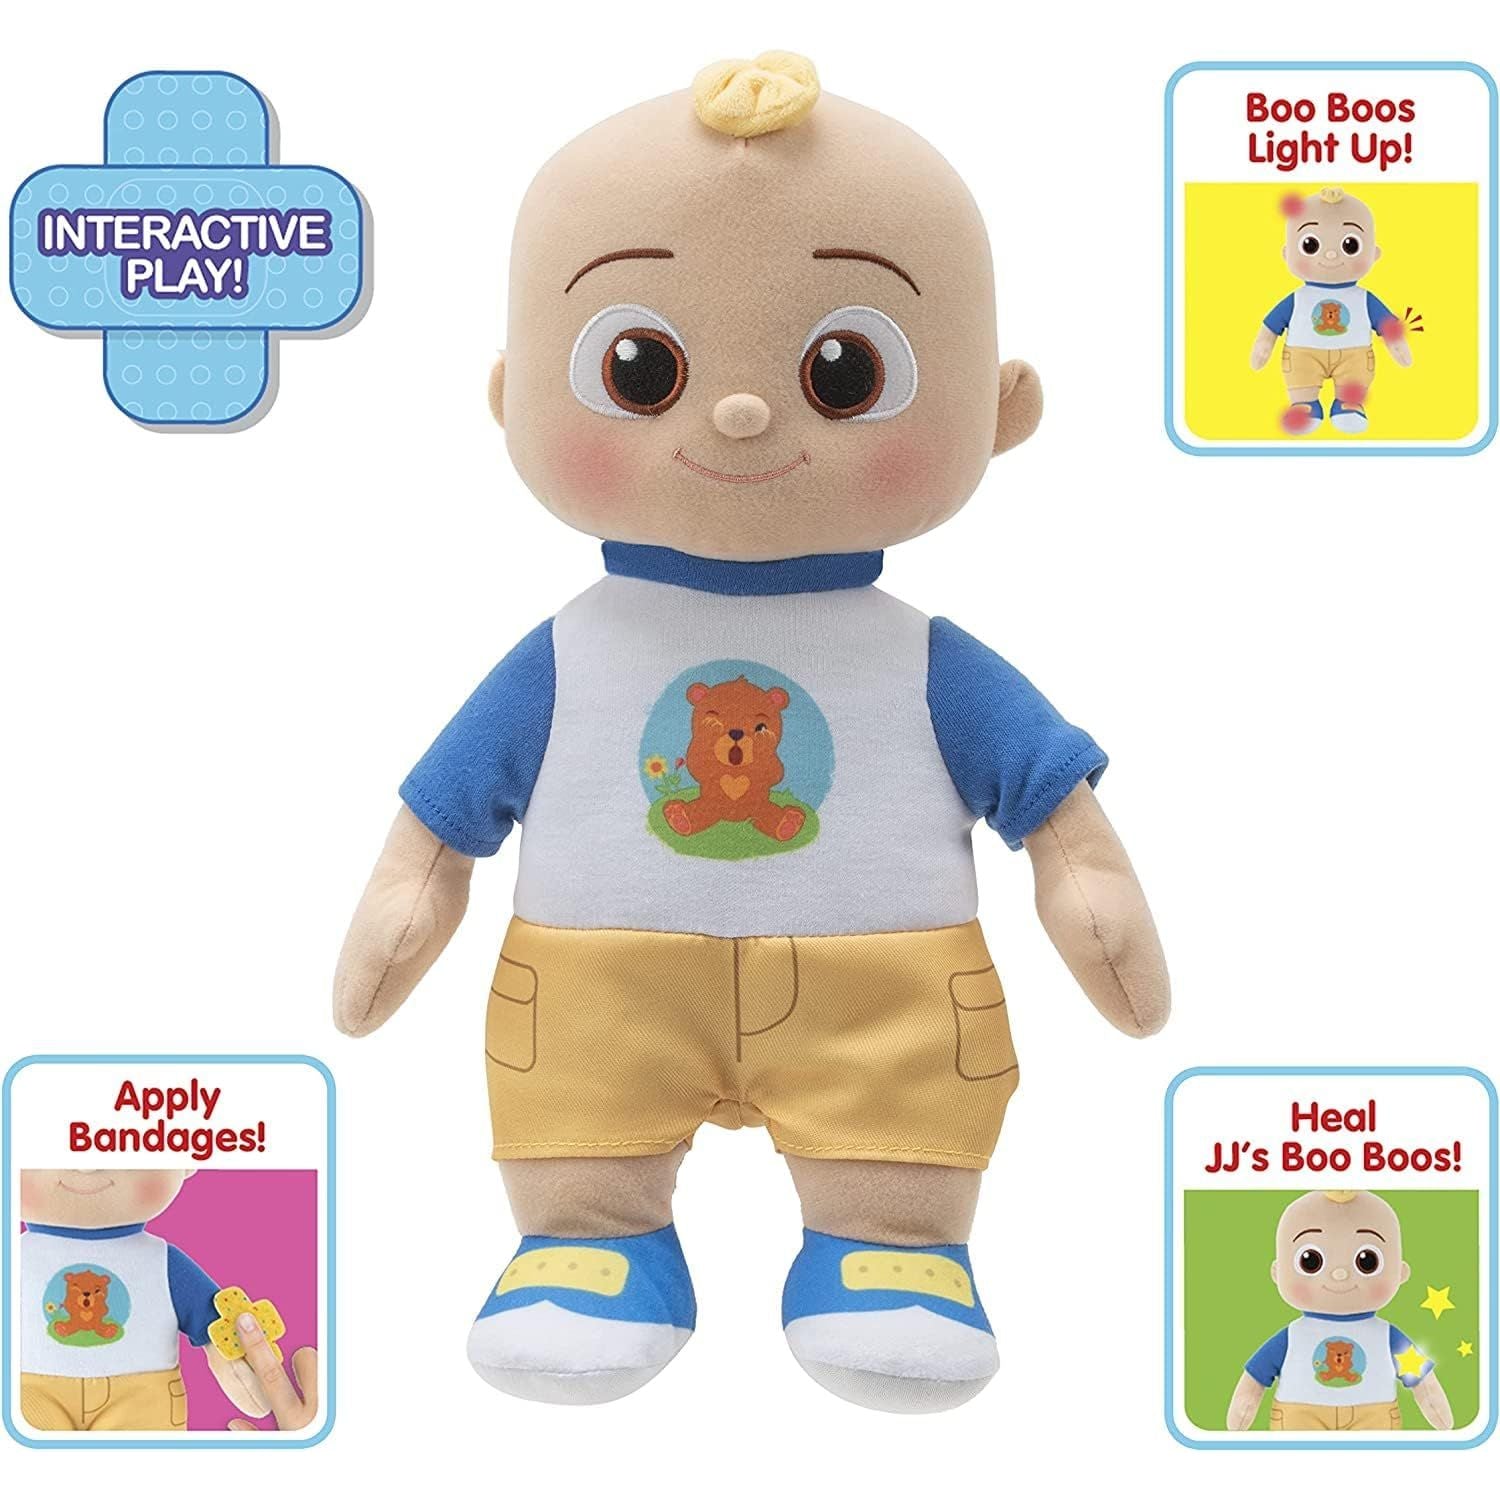 CoComelon Boo Boo JJ Deluxe Feature Plush - Includes Doctor Checkup Bag, Bandages, and Accessories to Care for JJ